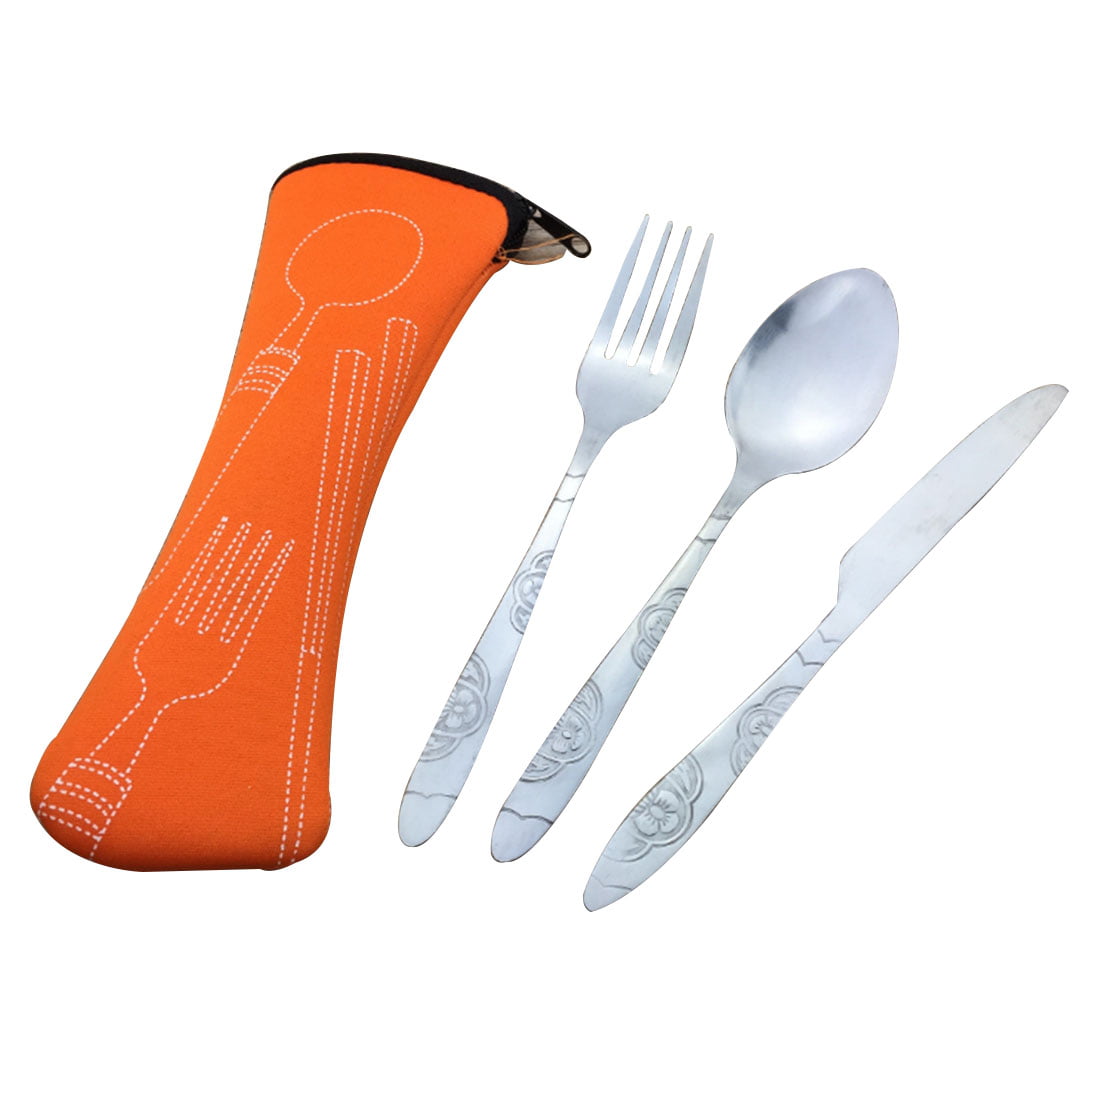 3pcs Portable Stainless Steel Tableware Dinnerware Travel Camp Cutlery With Bag